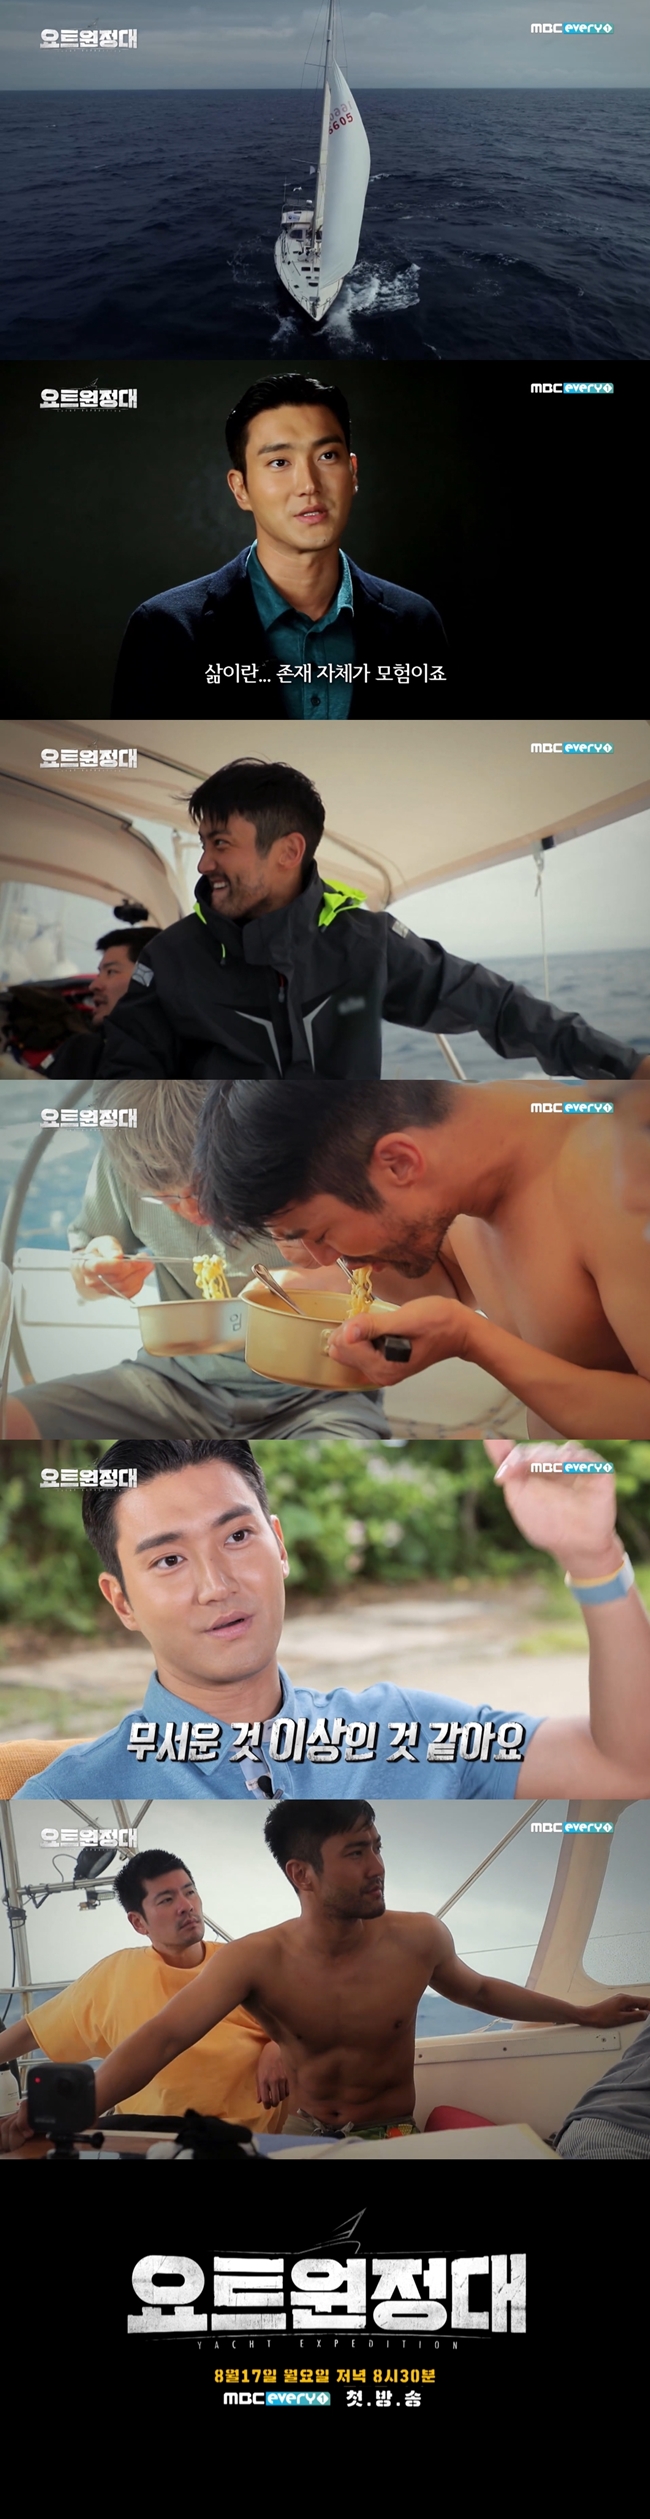 The rough adventure of Choi Siwon, yacht expedition, begins.MBC Everlons Yacht Expedition will be broadcast for the first time at 8:30 pm on the 17th.The yacht Expedition is a documentary entertainment program that shows the process of challenging the Pacific Ocean voyage by four men who dreamed of adventure.Captain Kim Seung-jin, who succeeded in traveling around the world alone with the first weaponless port in Korea, and four men, Jin Goo, Choi Siwon, Chang Kiha and Song Ho-joon, leave for Pacific Ocean.Earlier, the Yacht Expeditionary Team revealed the characters announcement Jin Goo, which attracted attention.In the character preview, Jin Goo was enthusiastic in the rising waves and the heavy rains, and expected to be the second Earth.In the meantime, Choi Siwon, the second character of the yacht expedition, was released.The yacht Expedition character preview Choi Siwon begins with a voice of one yacht shaking at stake, Choi Siwons It will not be easy for us to sail on top of it.Then, Choi Siwon, who is sailing on the actual yacht, is revealed without hesitation.Choi Siwon was motion sick on a shaking yacht, or hit by a water slap because of unstoppable waves.The scenes that follow are also the shock itself.Choi Siwon, who grew up with a beard, took off his top and inhaled an instant noodle on the yacht, falling and falling in a shaking wave.If Choi Siwon, a synonym for health, has been shaken to this extent, I am more curious about what the situation has been.Choi Siwon, who was excited that life is an adventure itself, said, I think it is more than scary.The production team of the yacht expedition was also confident of the second real Earth, which was not seen in any entertainment.The Pacific Ocean sailor yacht Expedition, which is a blockbuster of four men, Jin Goo, Choi Siwon, Chang Kiha and Song Ho-joon, will be broadcasted at 8:30 pm on the 17th.Photo Offering MBC Everlons yacht Expedition